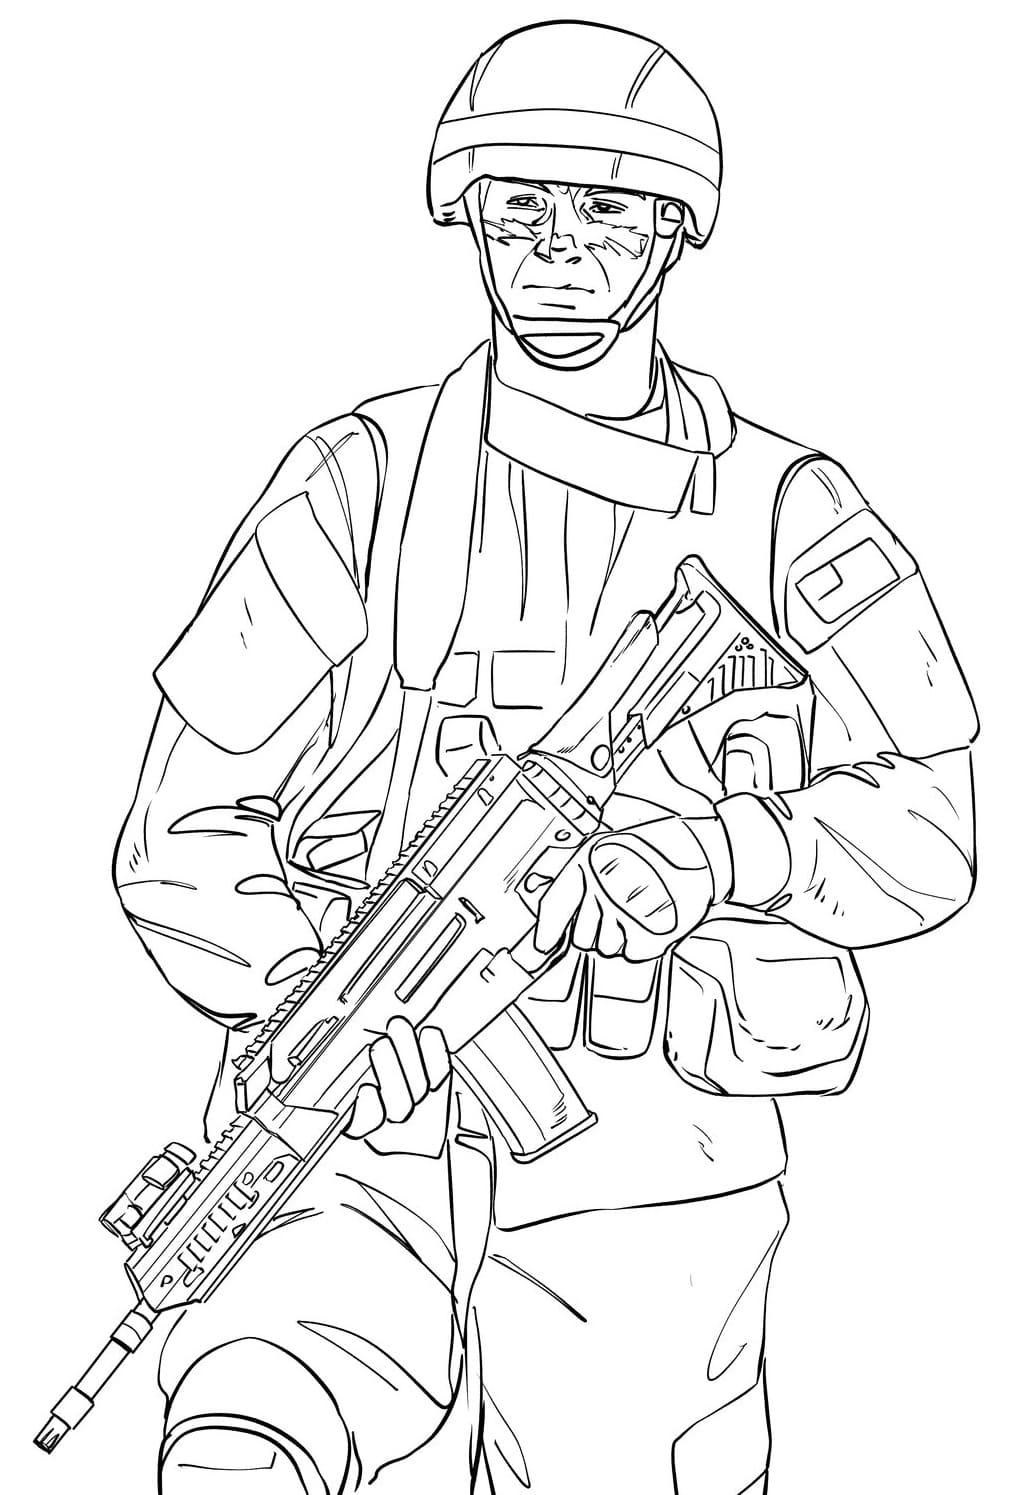 Simple SWAT Police coloring page - Download, Print or Color Online for Free